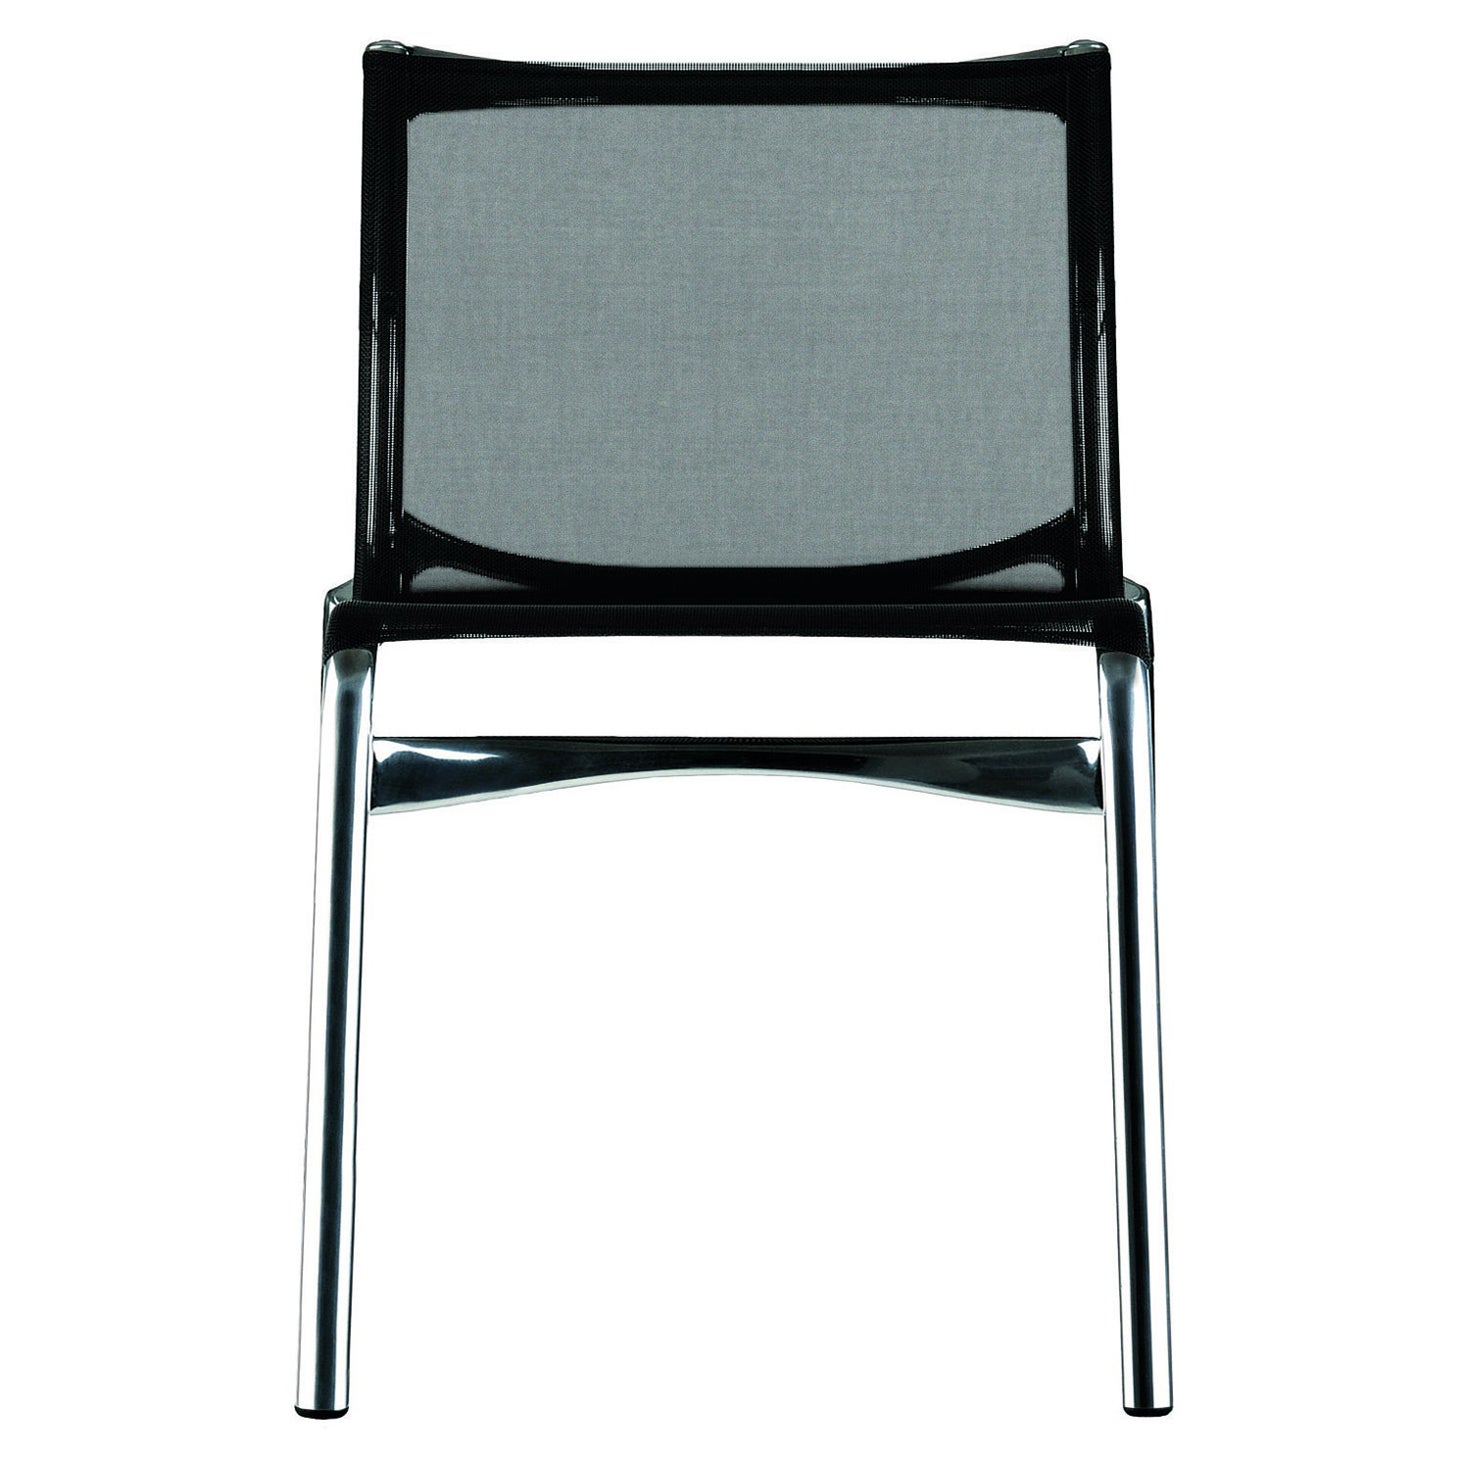 Alias Frame 52 Chair in Black Mesh Seat & Black with Polished Aluminium Frame